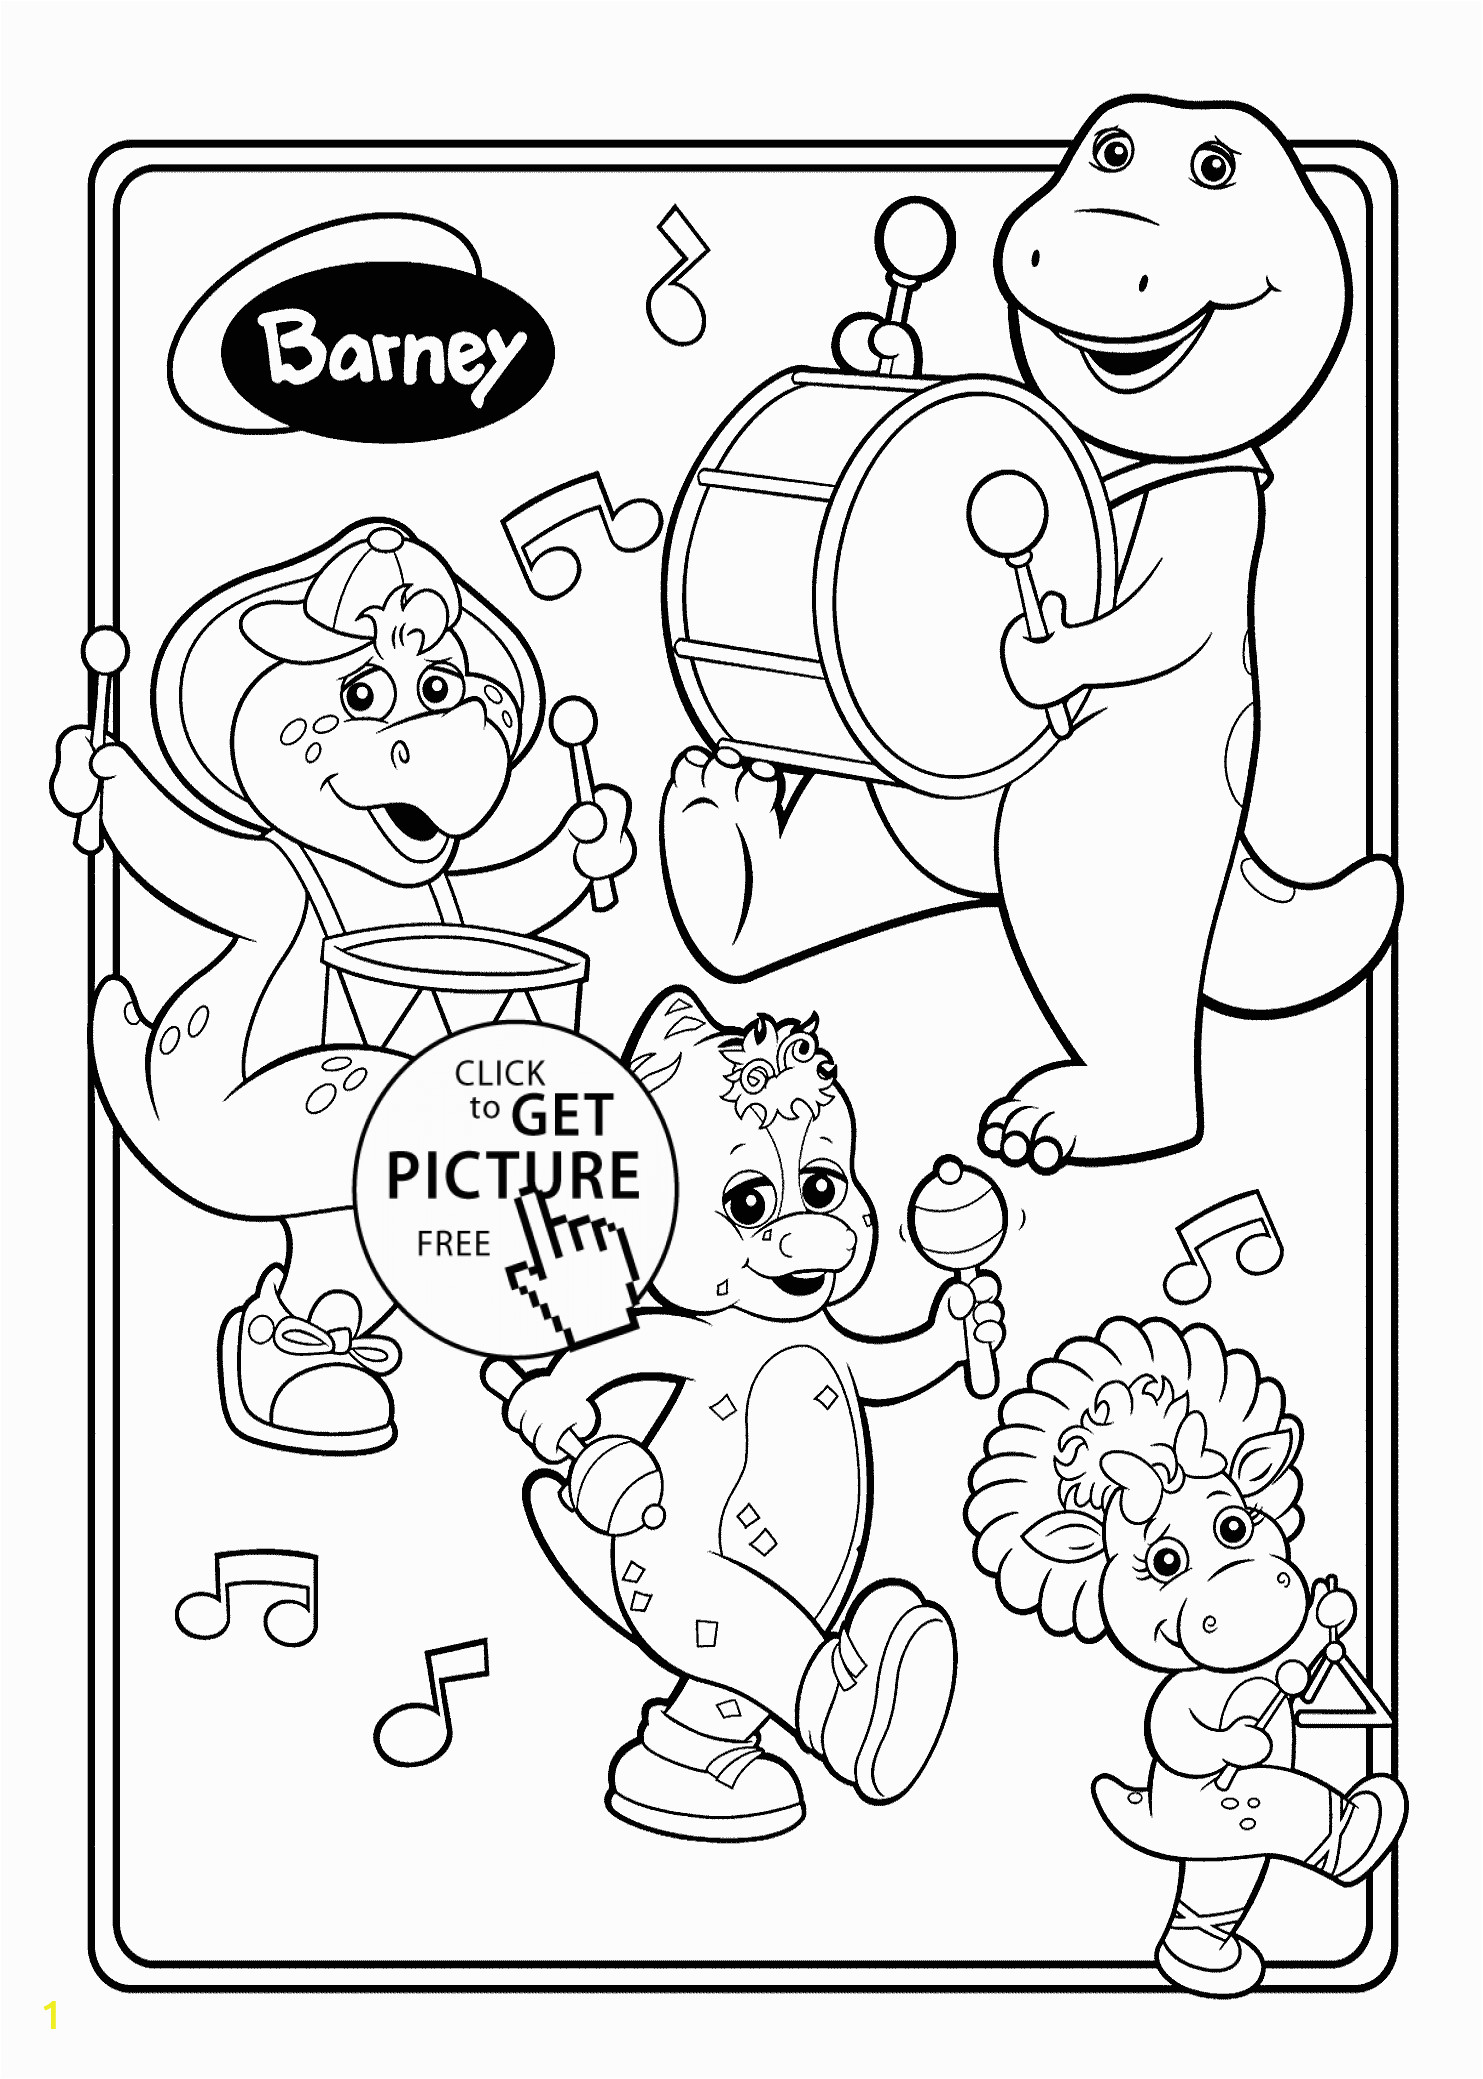 barney birthday coloring pages